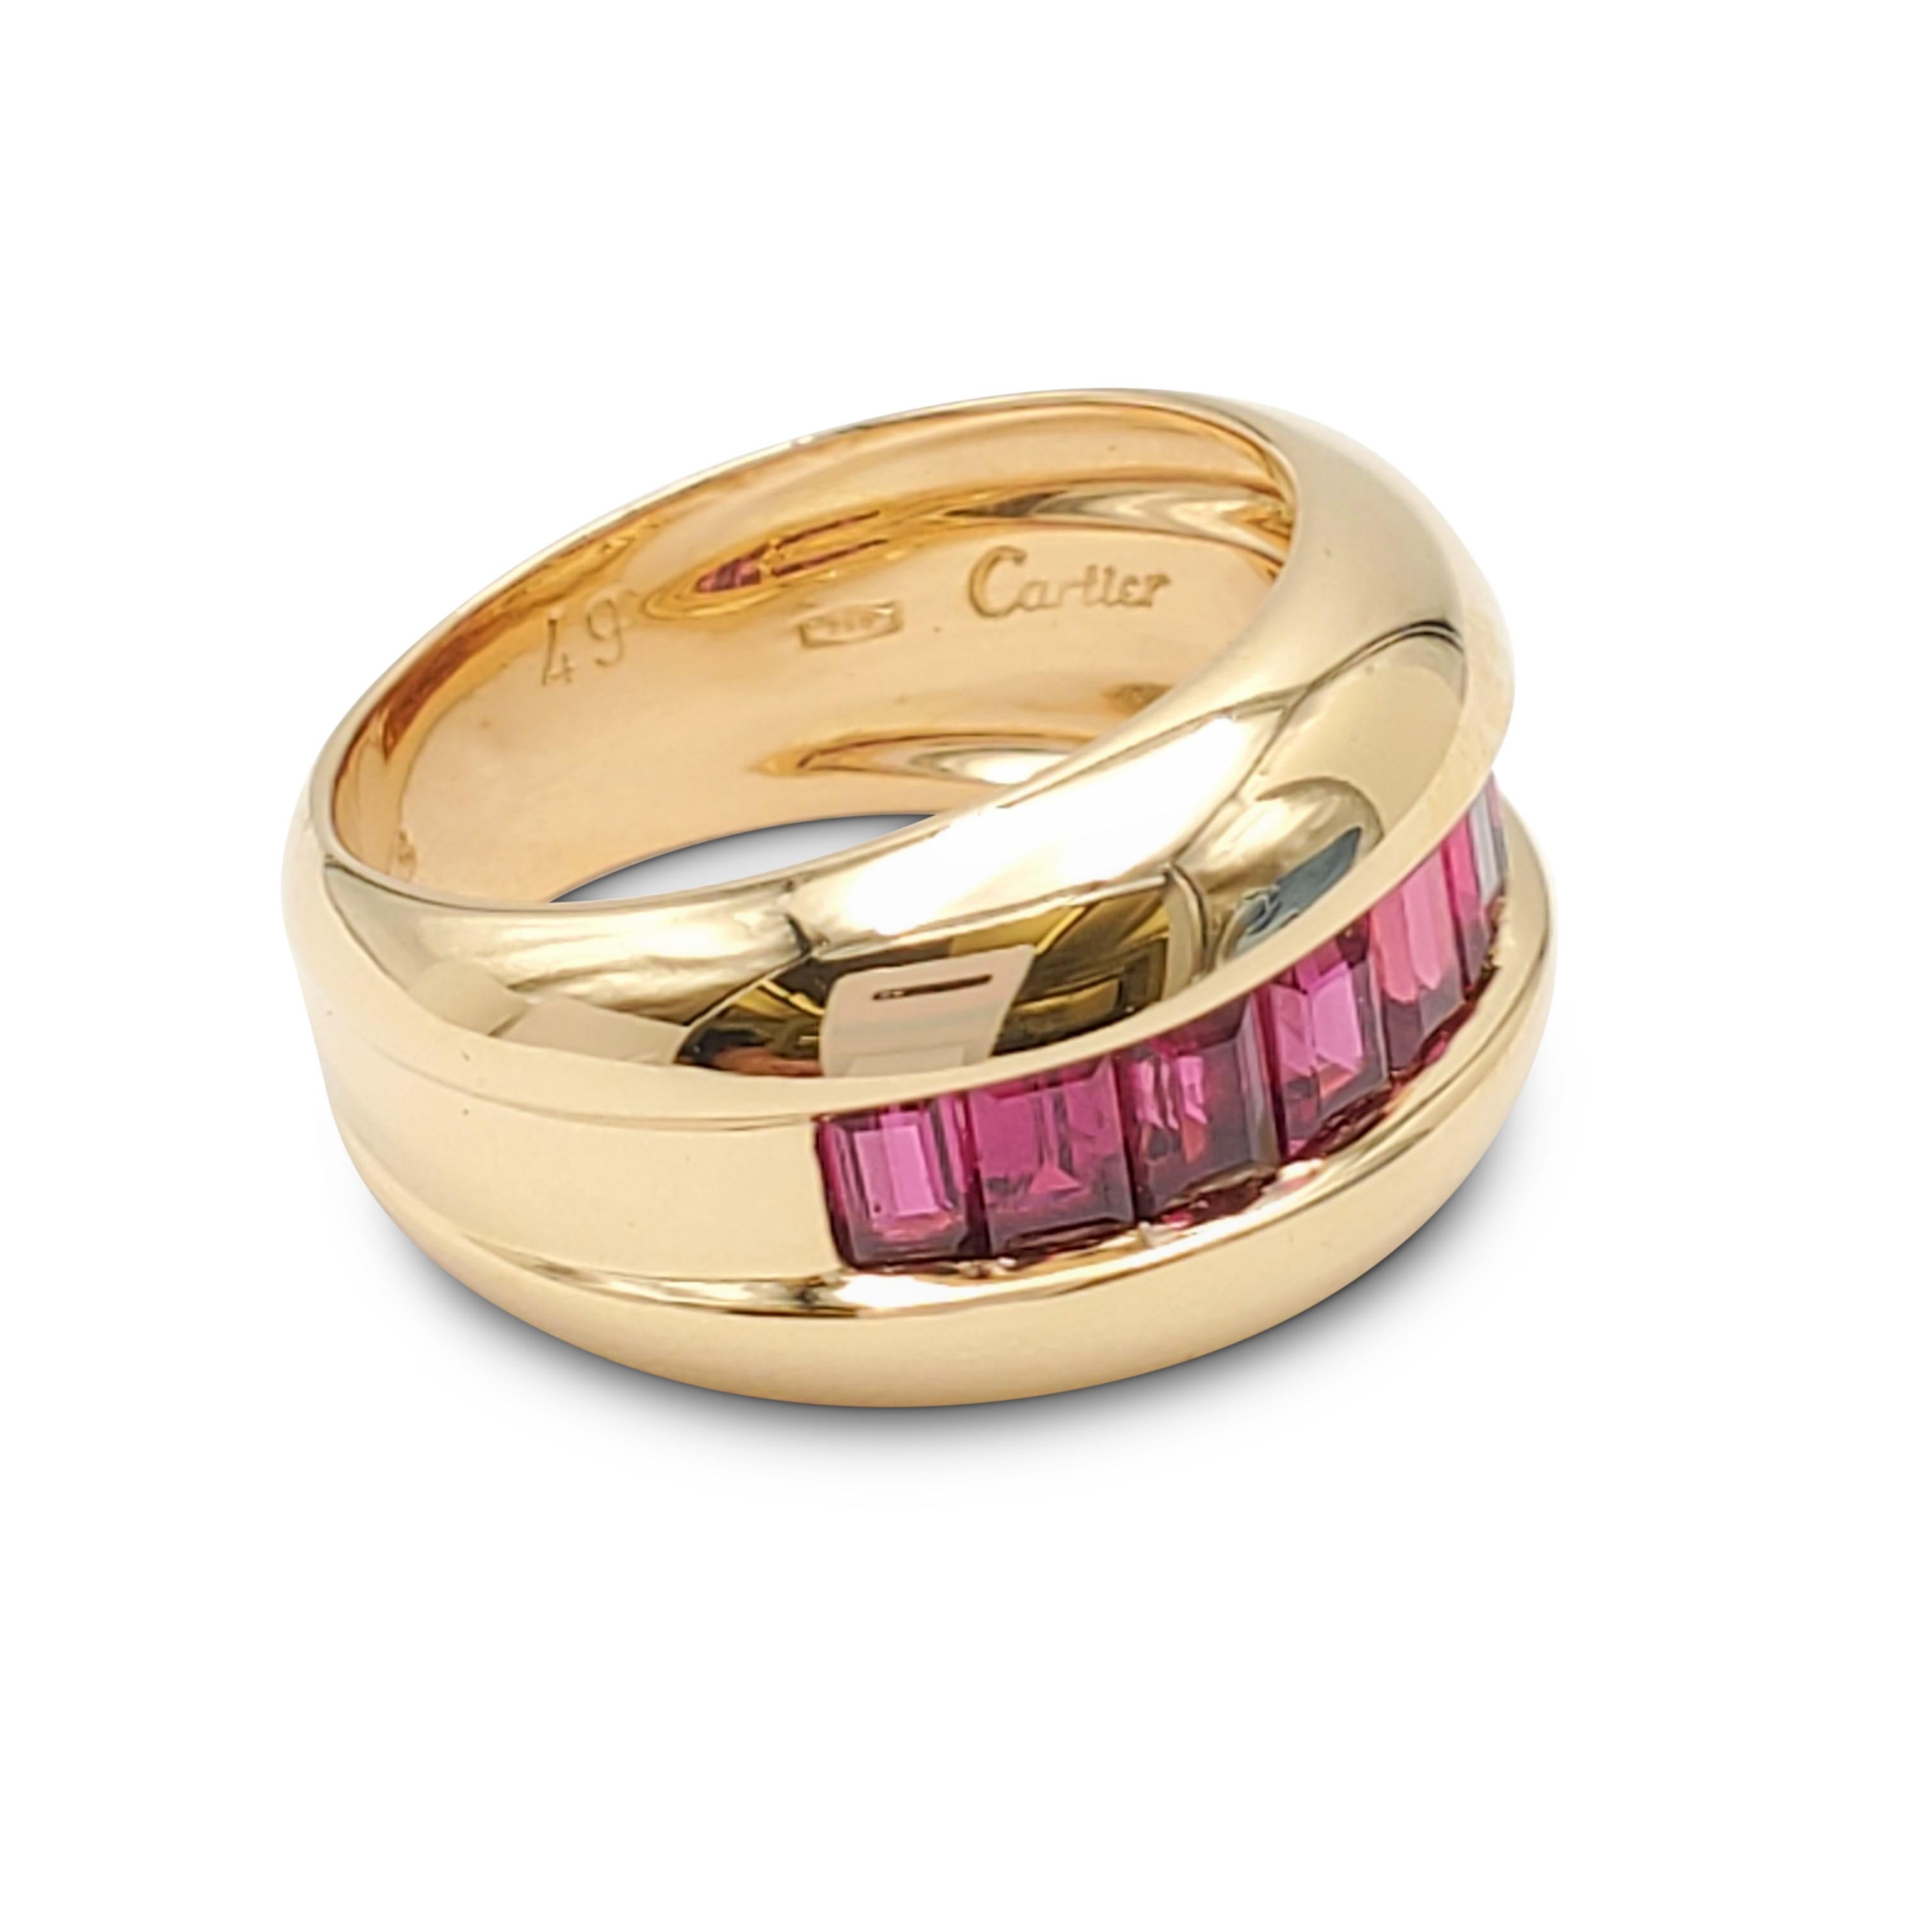 Authentic Cartier ring crafted in 18 karat yellow gold featuring calibre cut rubies weighing an 1.00 estimated carts in total weight. Signed Cartier, 750, 49, with serial number and hallmarks. Ring size 4 3/4. The ring is not presented with the